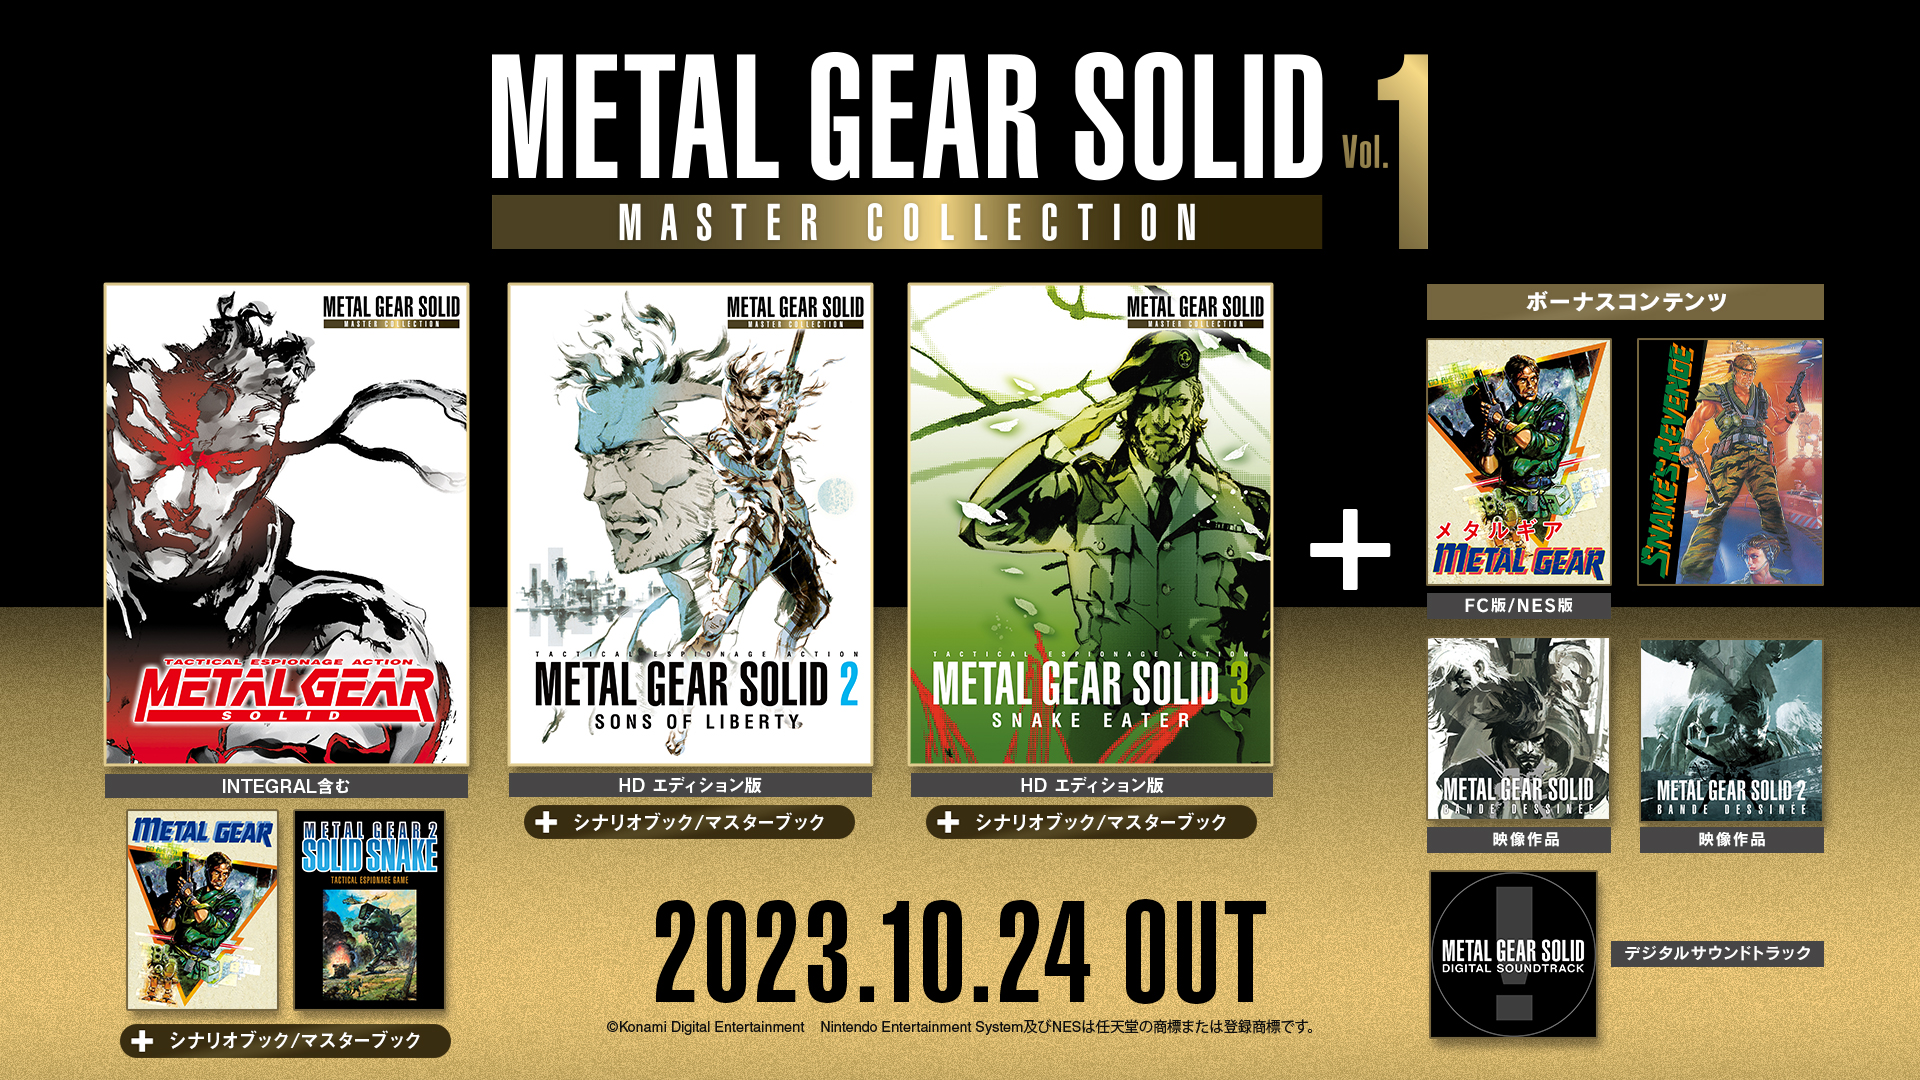 PS5®『METAL GEAR SOLID: MASTER COLLECTION Vol.1』10月24日発売決定 